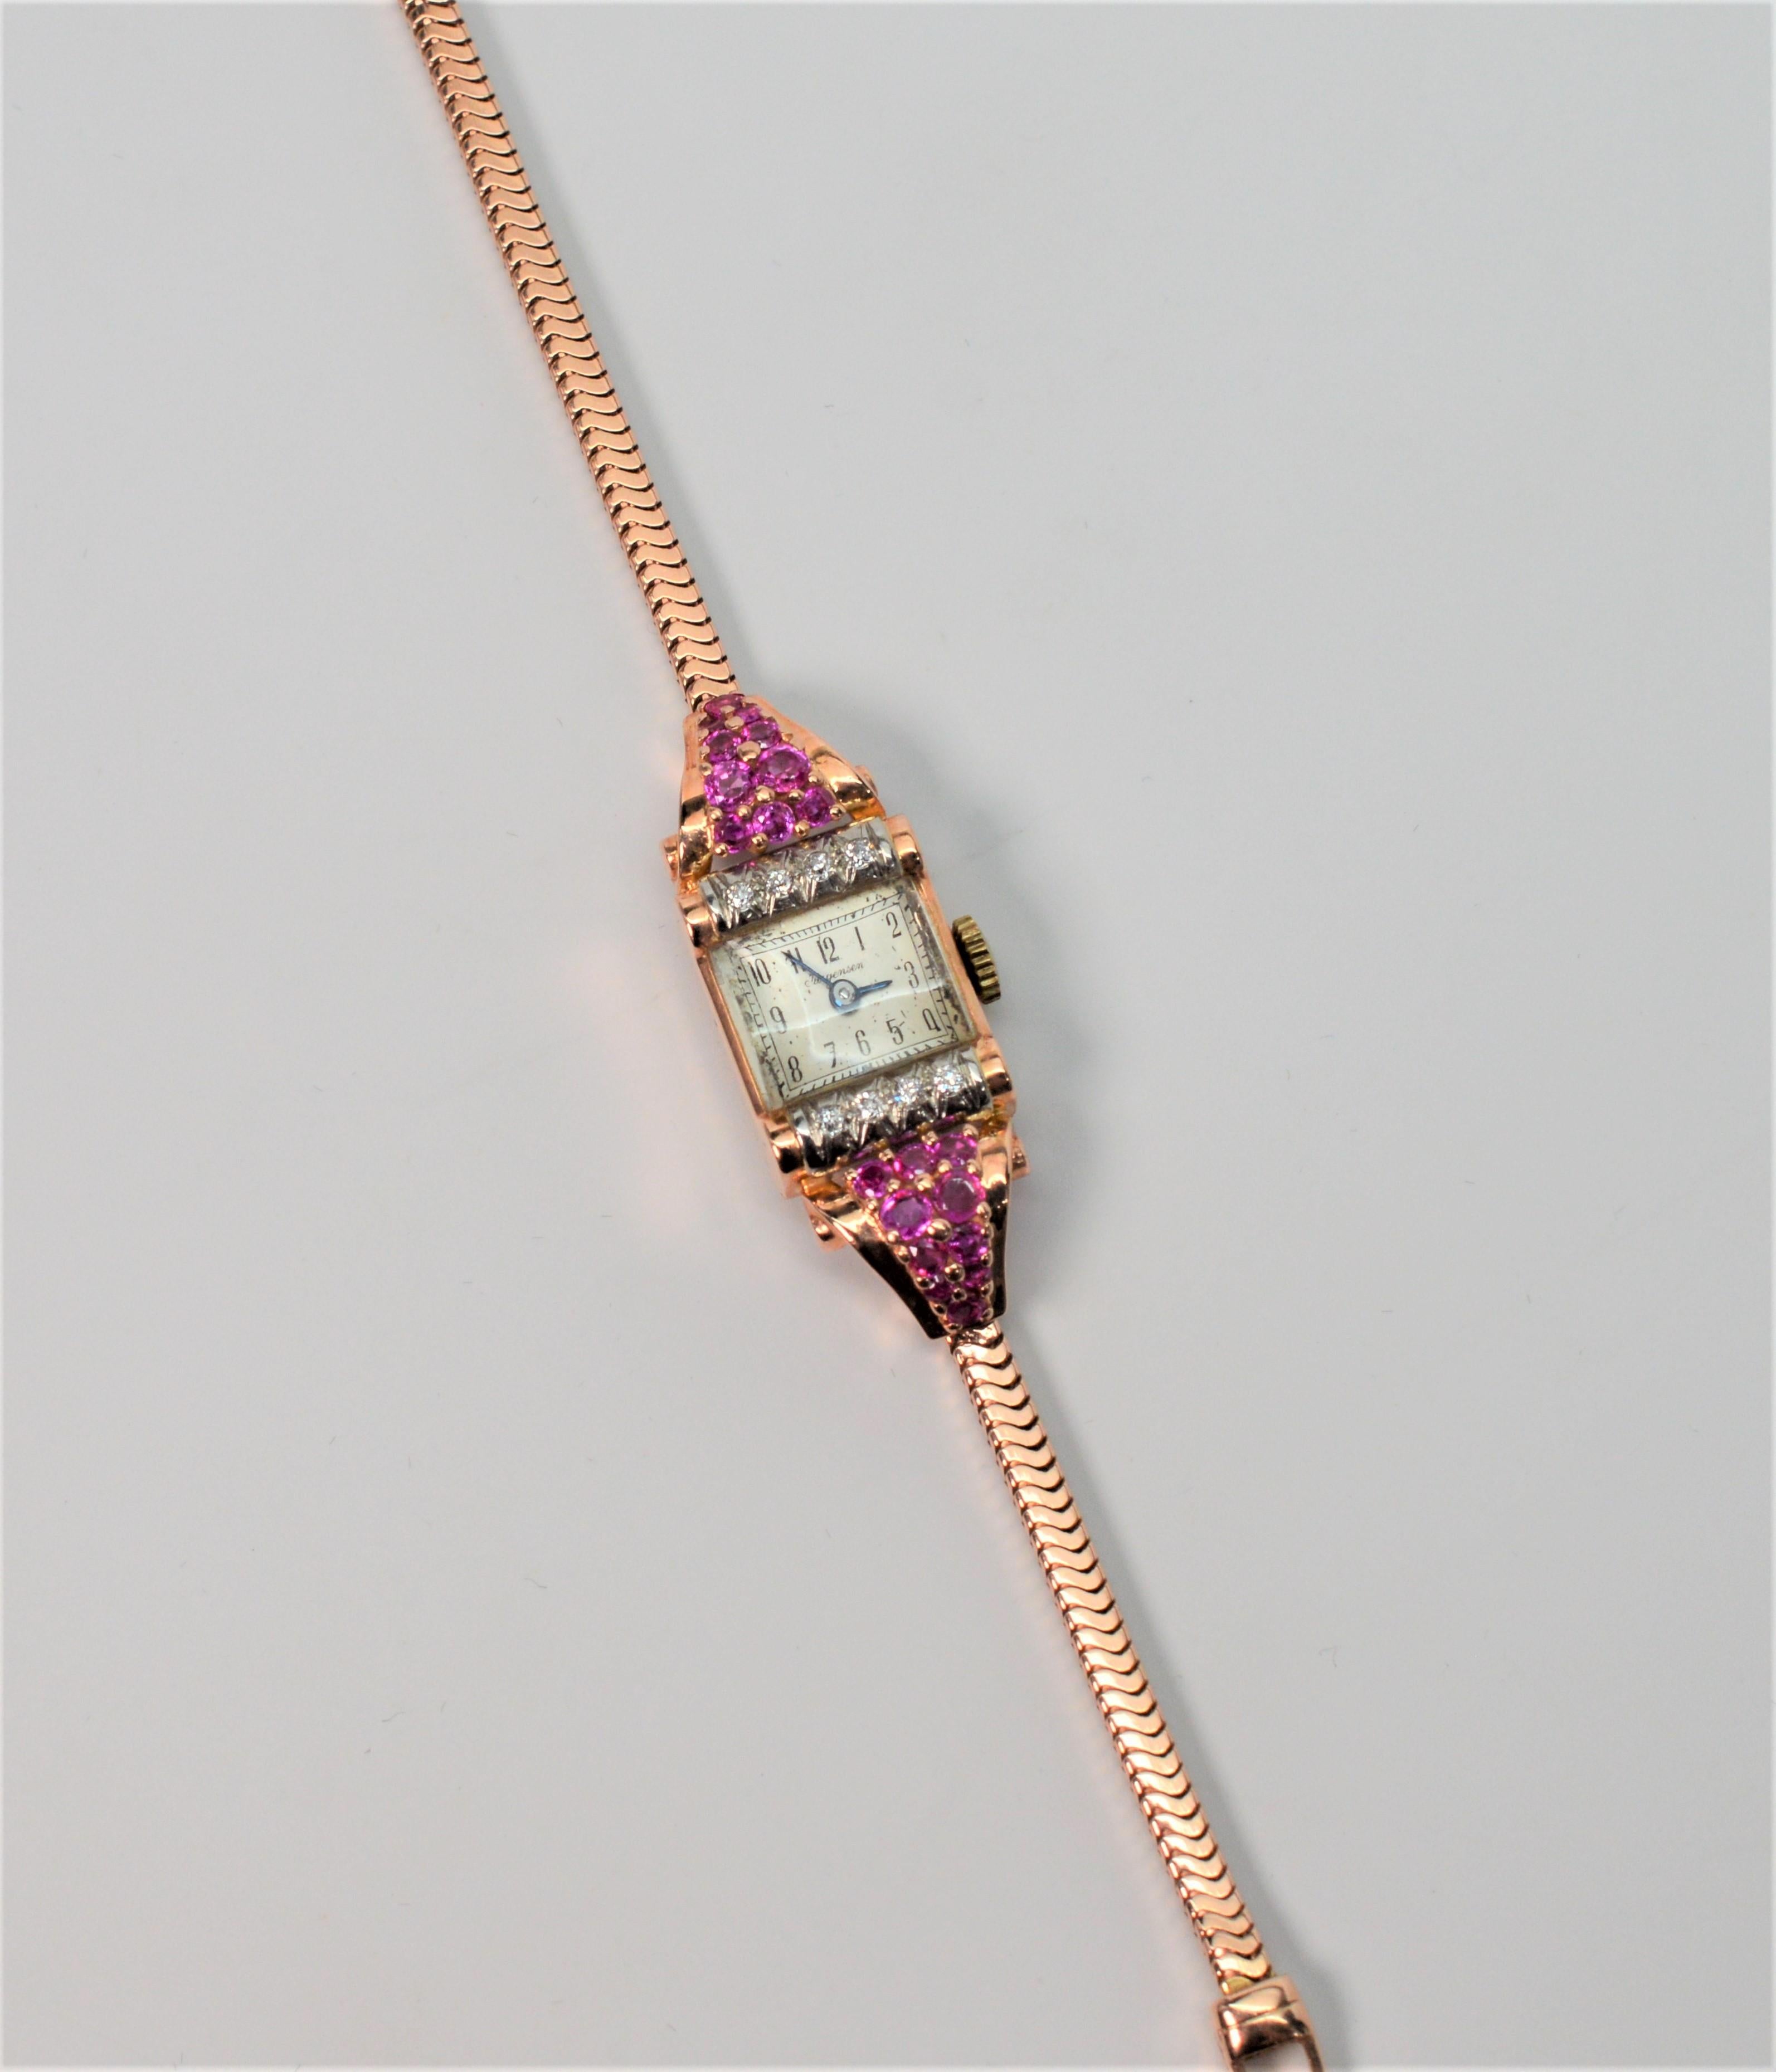 Women's Jules Jurgensen Yellow Gold Bracelet Wristwatch with Ruby Accents For Sale